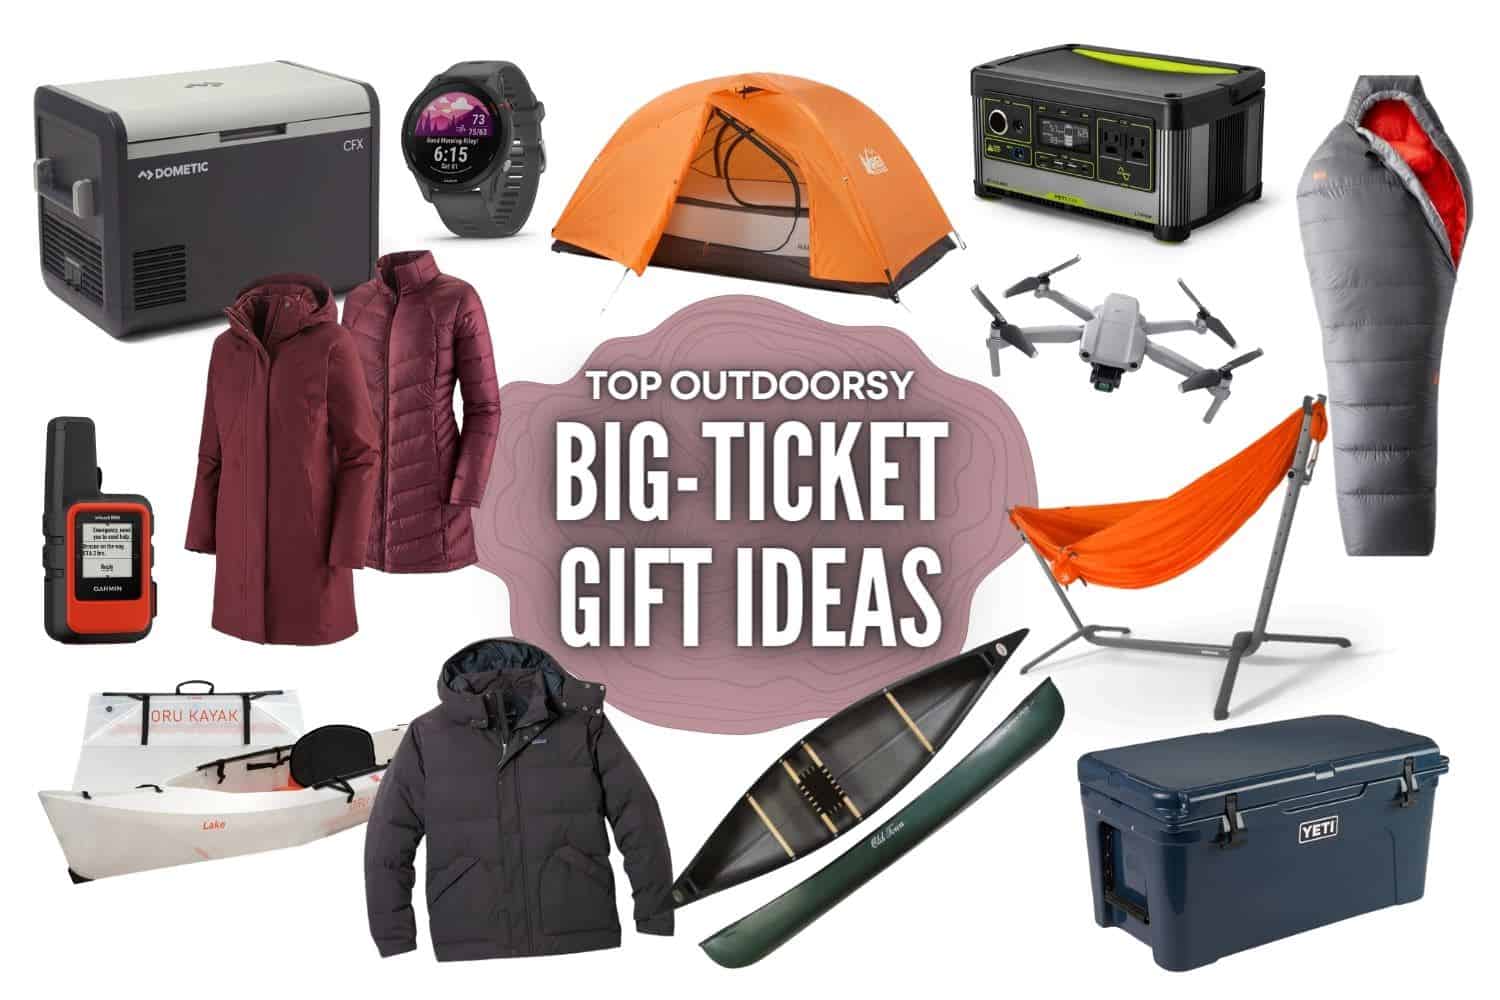 https://www.themandagies.com/wp-content/uploads/2022/11/Big-Ticket-Gifts-For-Outdoors-The-Mandagies-Feature-Image-1.jpg